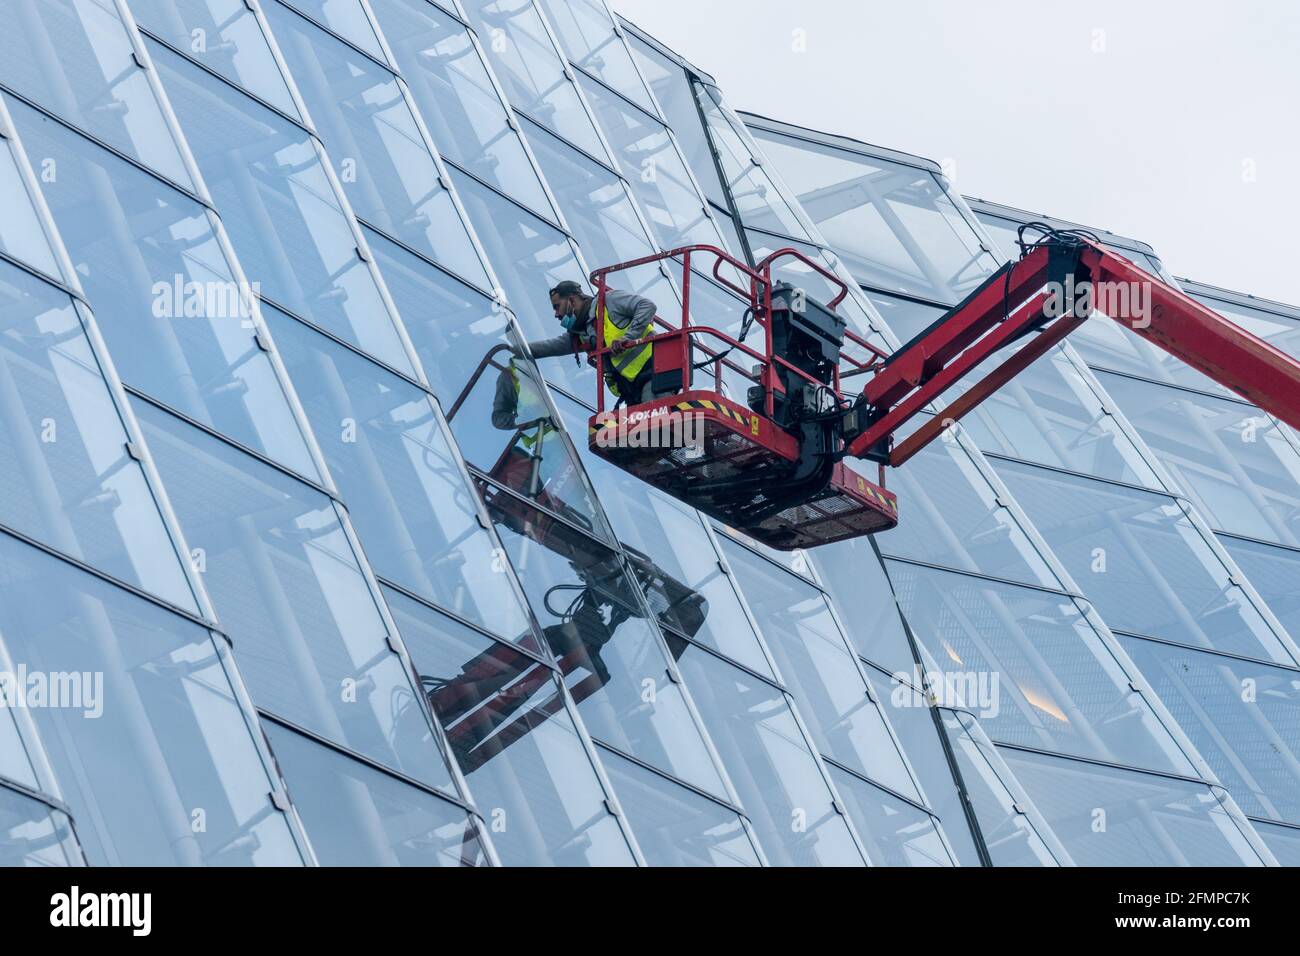 Crane with workman at glass facade with reflection Stock Photo